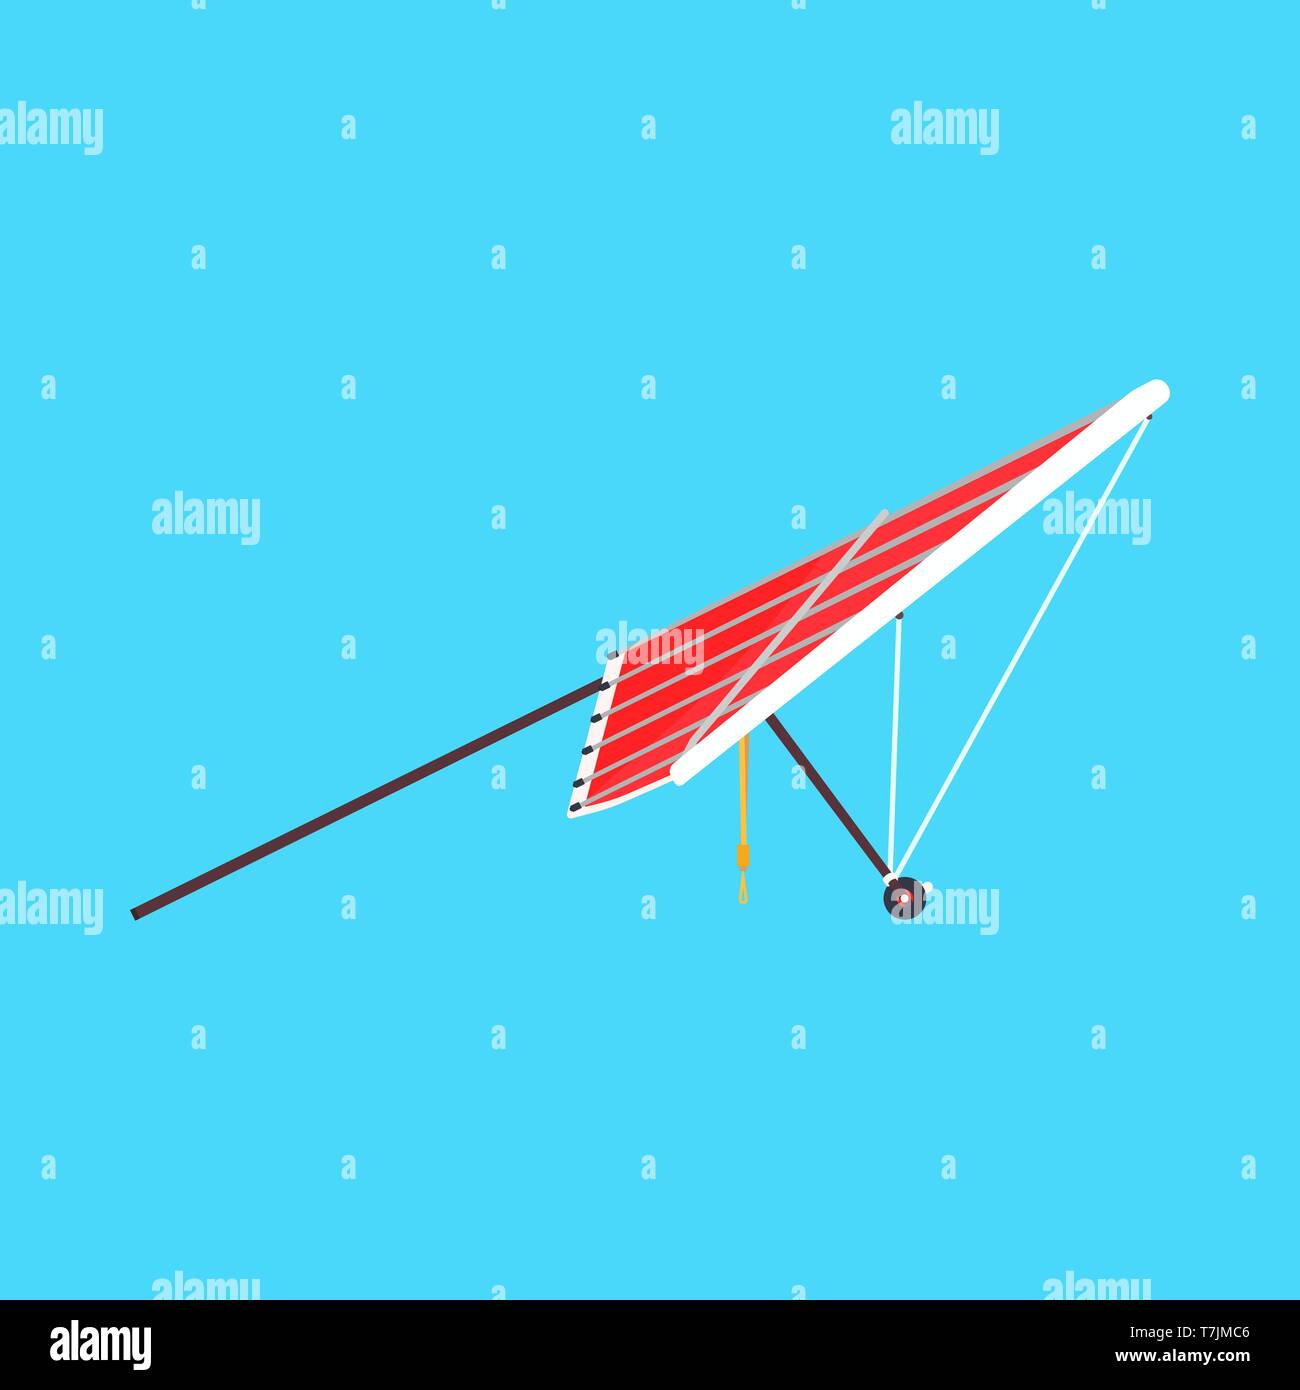 Hang glider sport extreme vector icon side view. Sky adventure hobby para skydiving. Cartoon red plane ascend Stock Vector